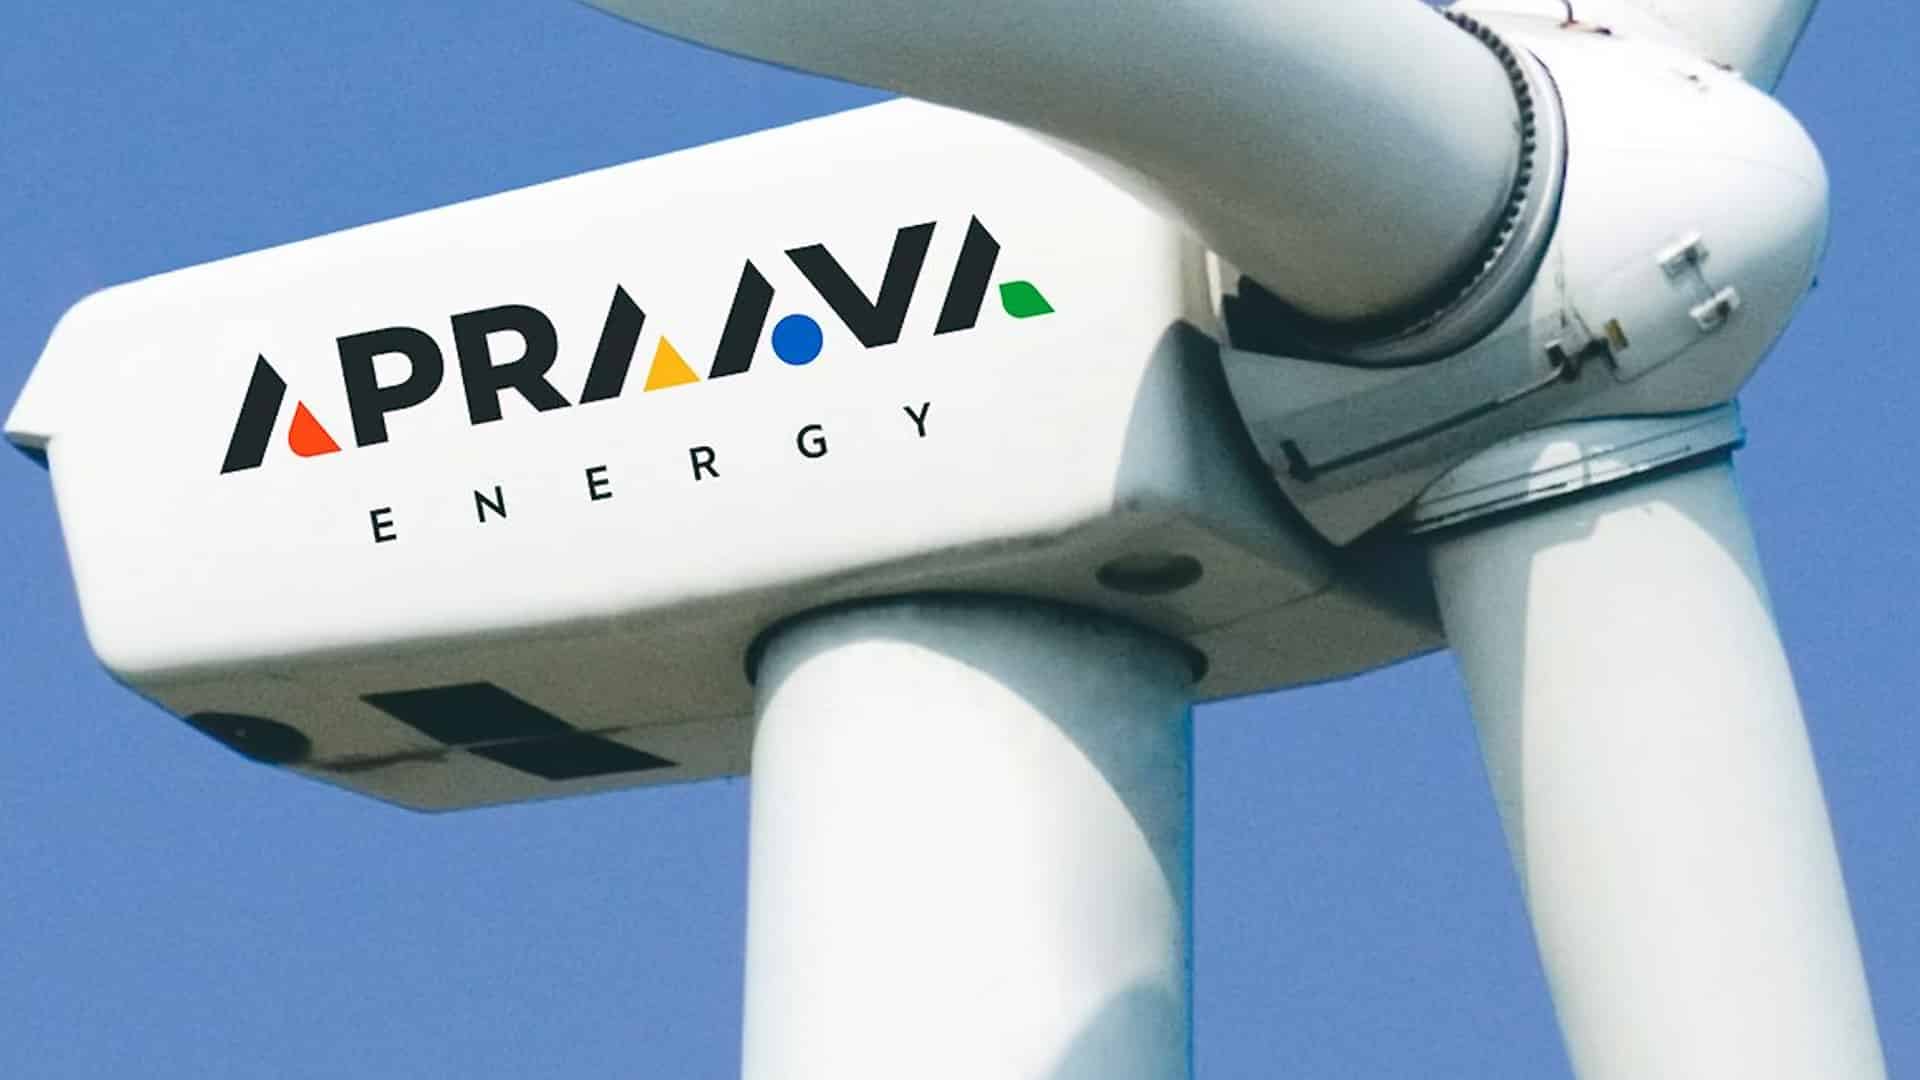 Apraava Energy inks pacts with REC, PFC to get Rs 9,120 cr finance for its projects